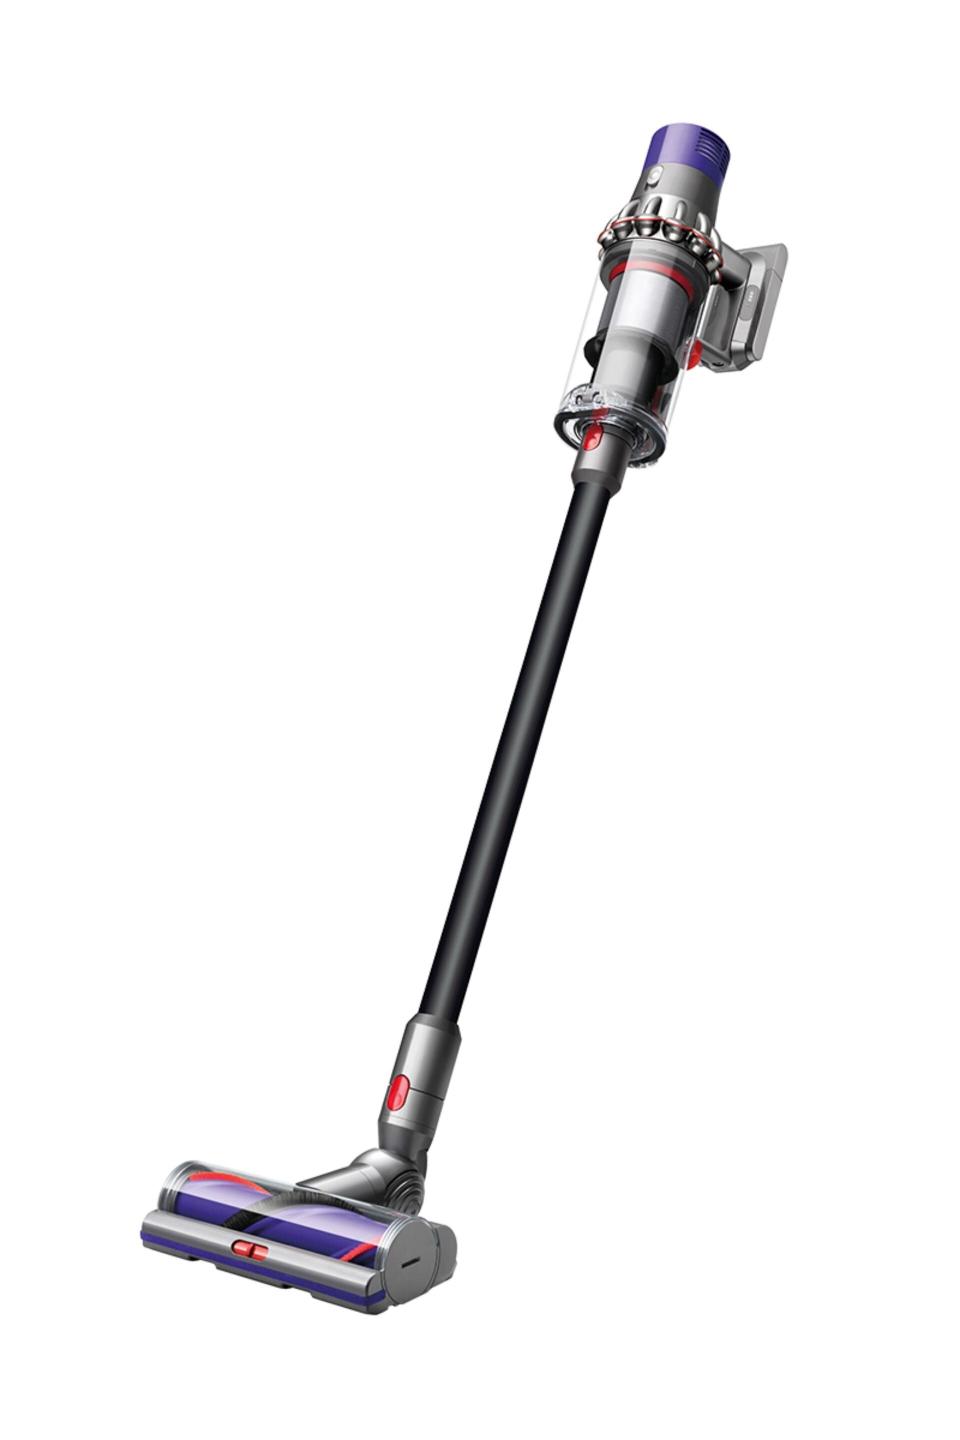 <a href="https://fave.co/36W7Gxh" target="_blank" rel="noopener noreferrer">Originally $550, get it now for $400 at Dyson</a>.